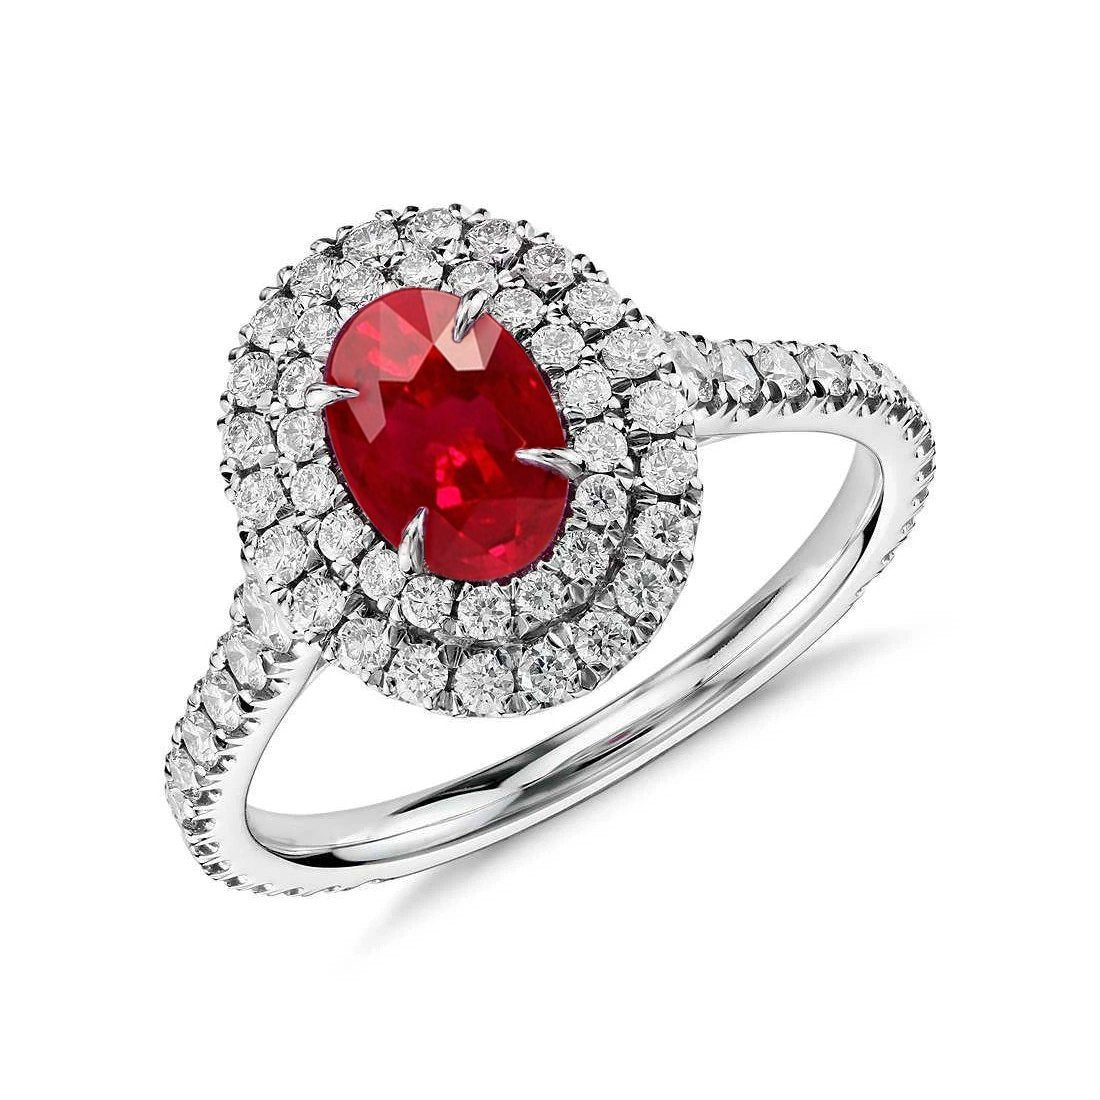 4.50 Ct Double Halo Ruby And Diamonds Ring Gold White 14K